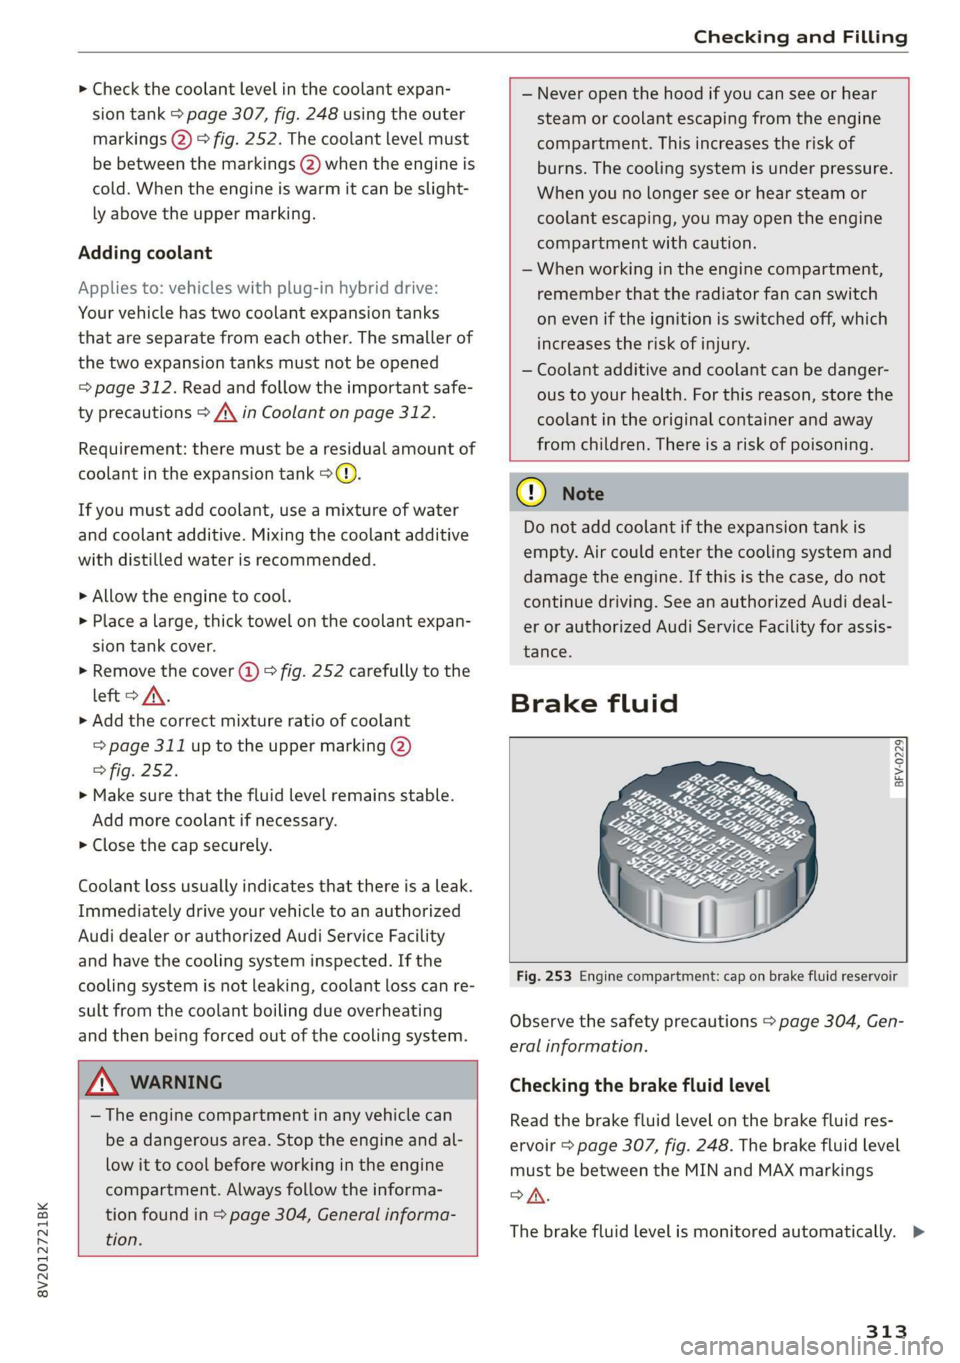 AUDI A3 2020  Owner´s Manual 8V2012721BK 
Checking and Filling 
  
> Check the coolant level in the coolant expan- 
sion tank > page 307, fig. 248 using the outer 
markings (2) > fig. 252. The coolant level must 
be between the m